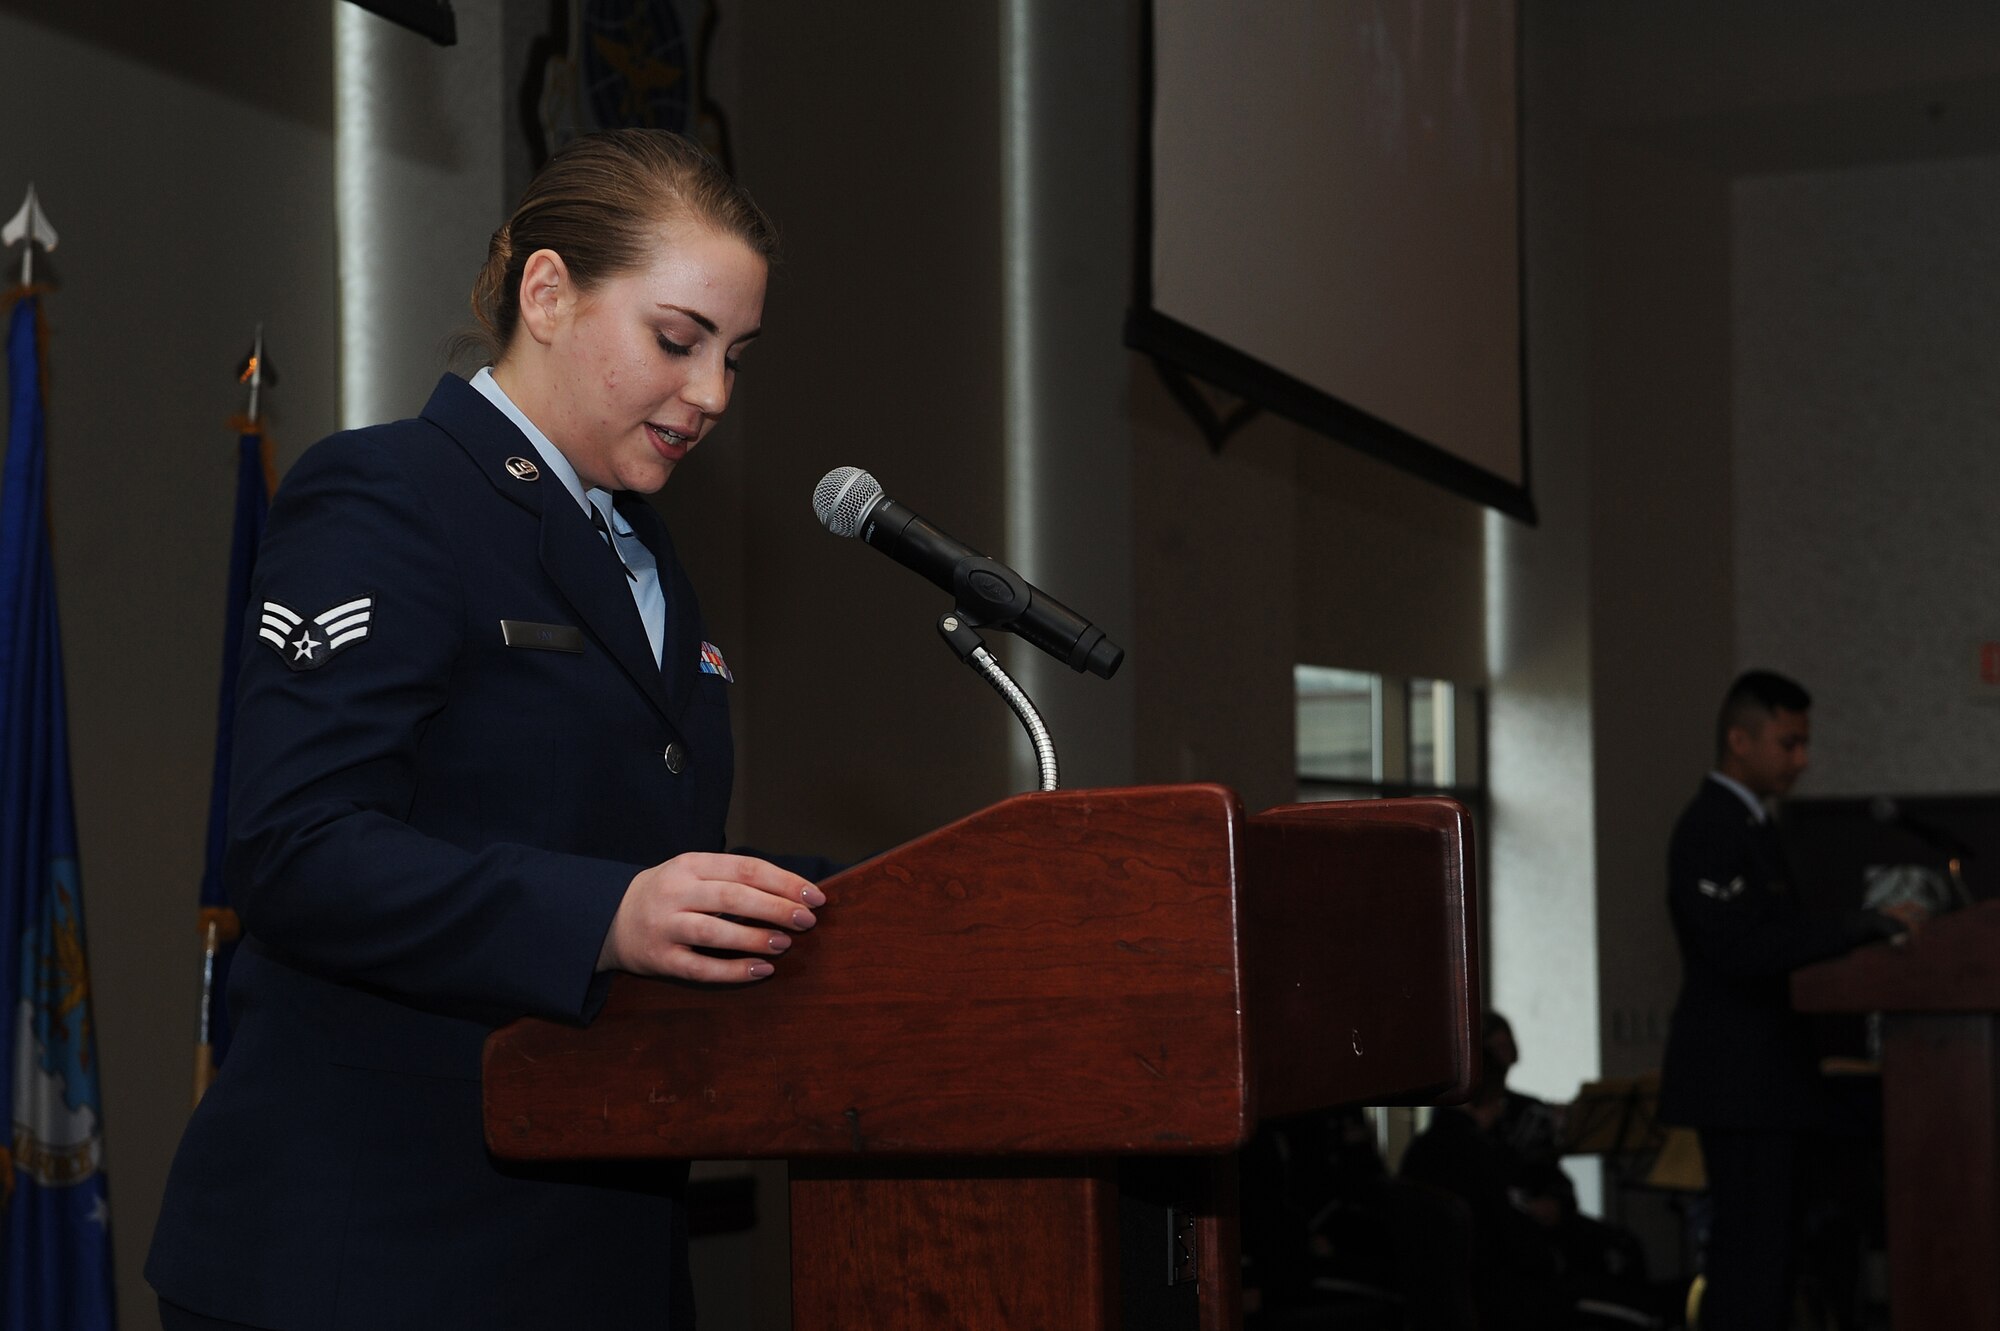 Senior Airman Sarah Lay, 375th Air Mobility Wing Legal Office military  justice paralegal, emcees a women's history luncheon at the Scott Event Center March 29. With a theme of, "Honoring Trailblazing Women in the Military," the event focused on female service members and the obstacles they had to overcome. (U.S. Air Force photo by Tech. Sgt. Maria Castle)